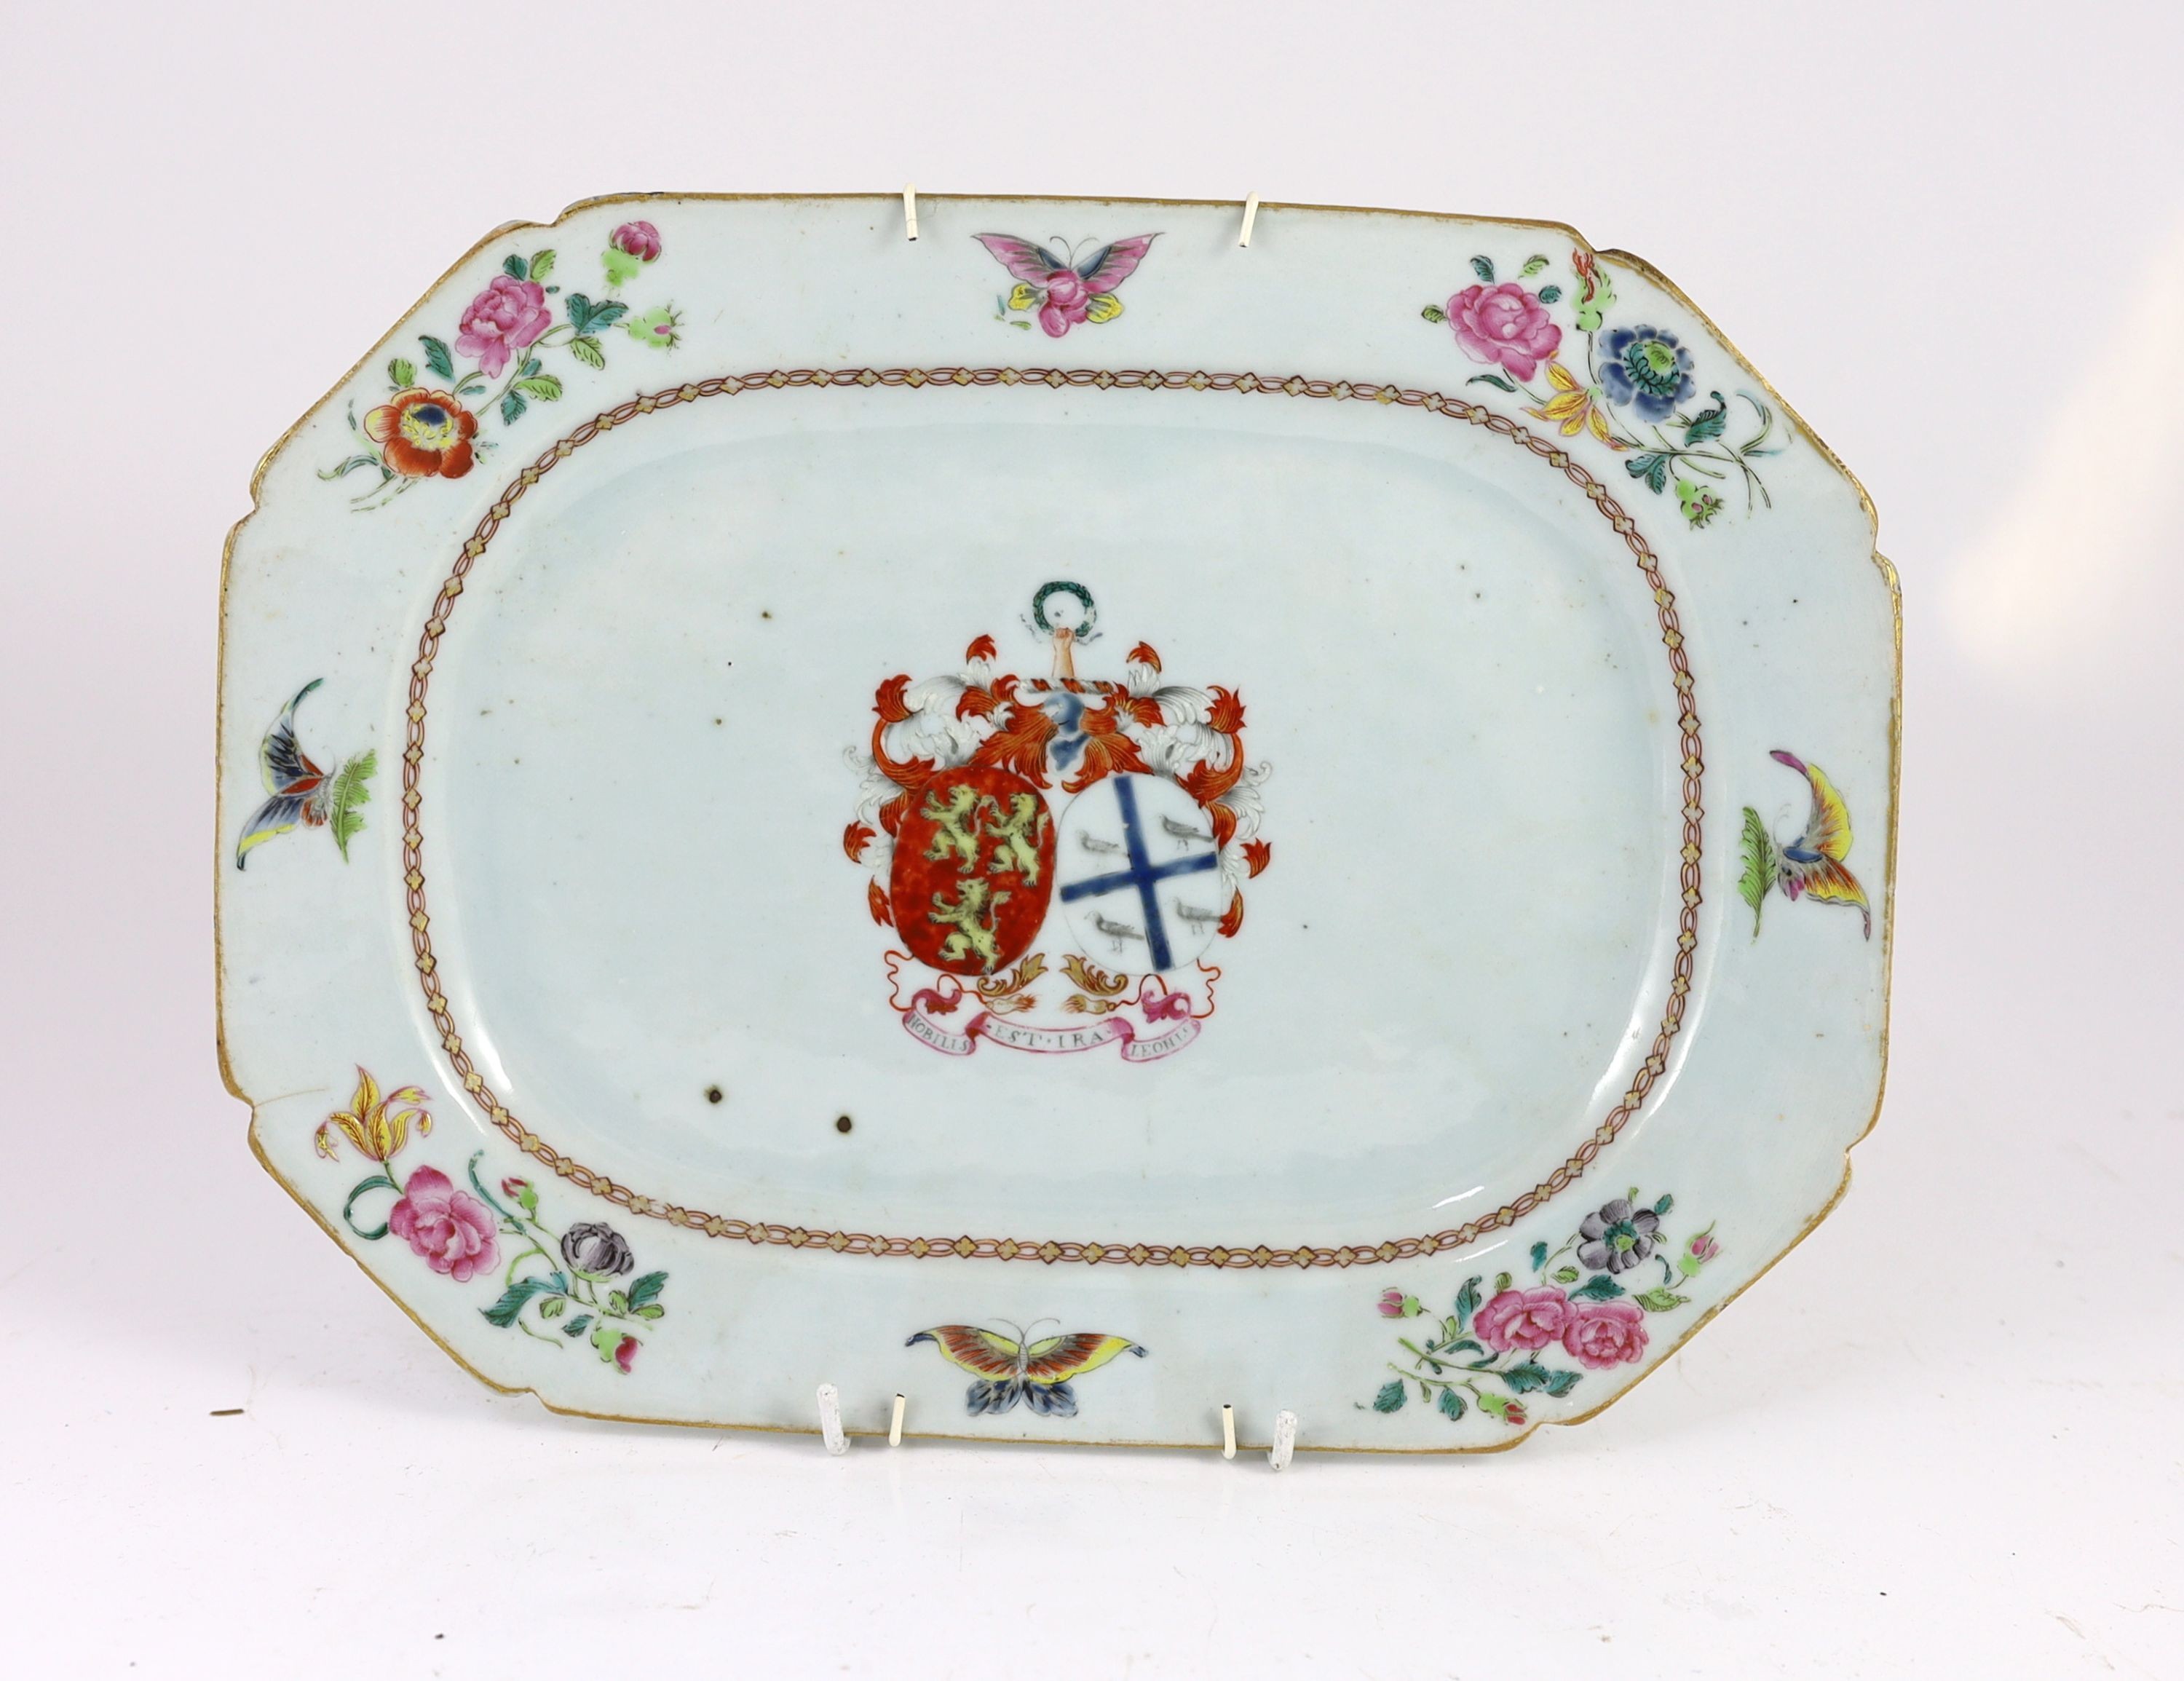 A set of five Chinese Armorial meat plates, circa 1755, with painted central Ross Family Coat of Arms, with motto - 'Nobilis Est Ira Leonis' 26 cm – 33 cm, some cracks